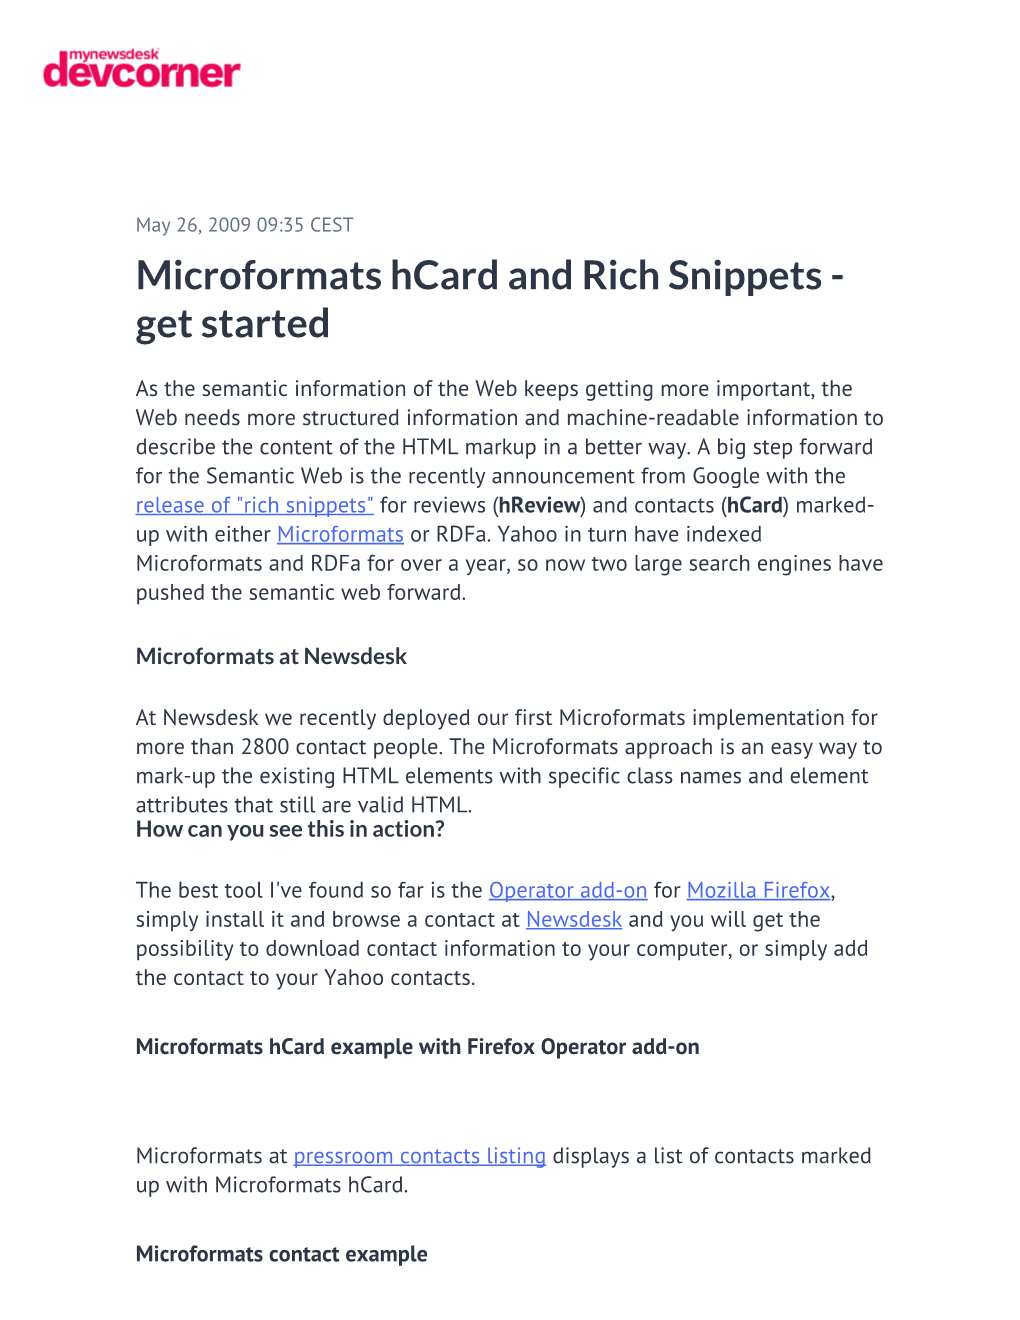 Microformats Hcard and Rich Snippets - Get Started